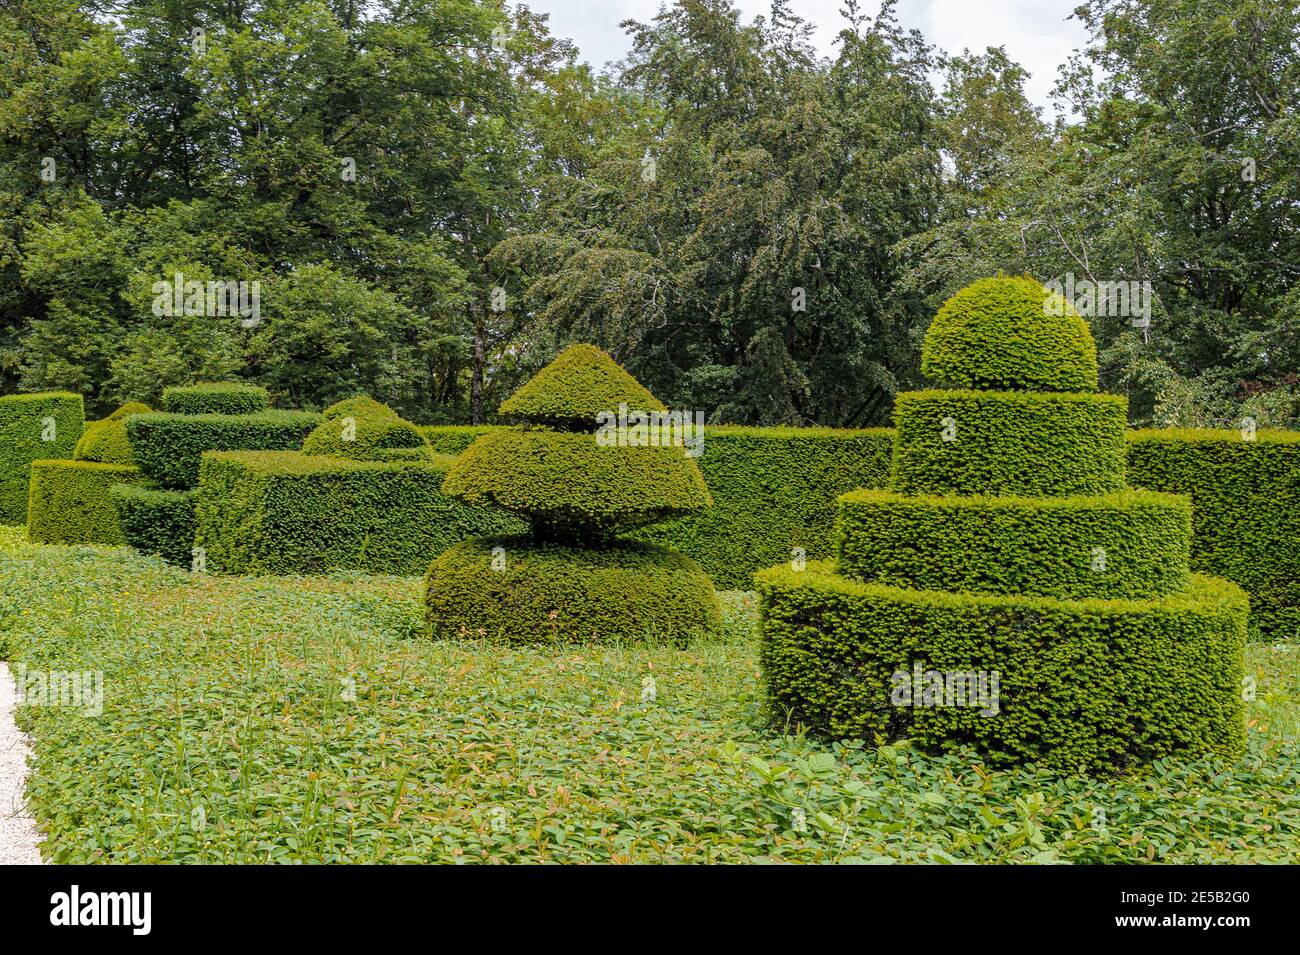 In a park in the southwest of France,  cut in topiaries bushes form an alley along the path. Stock Photo